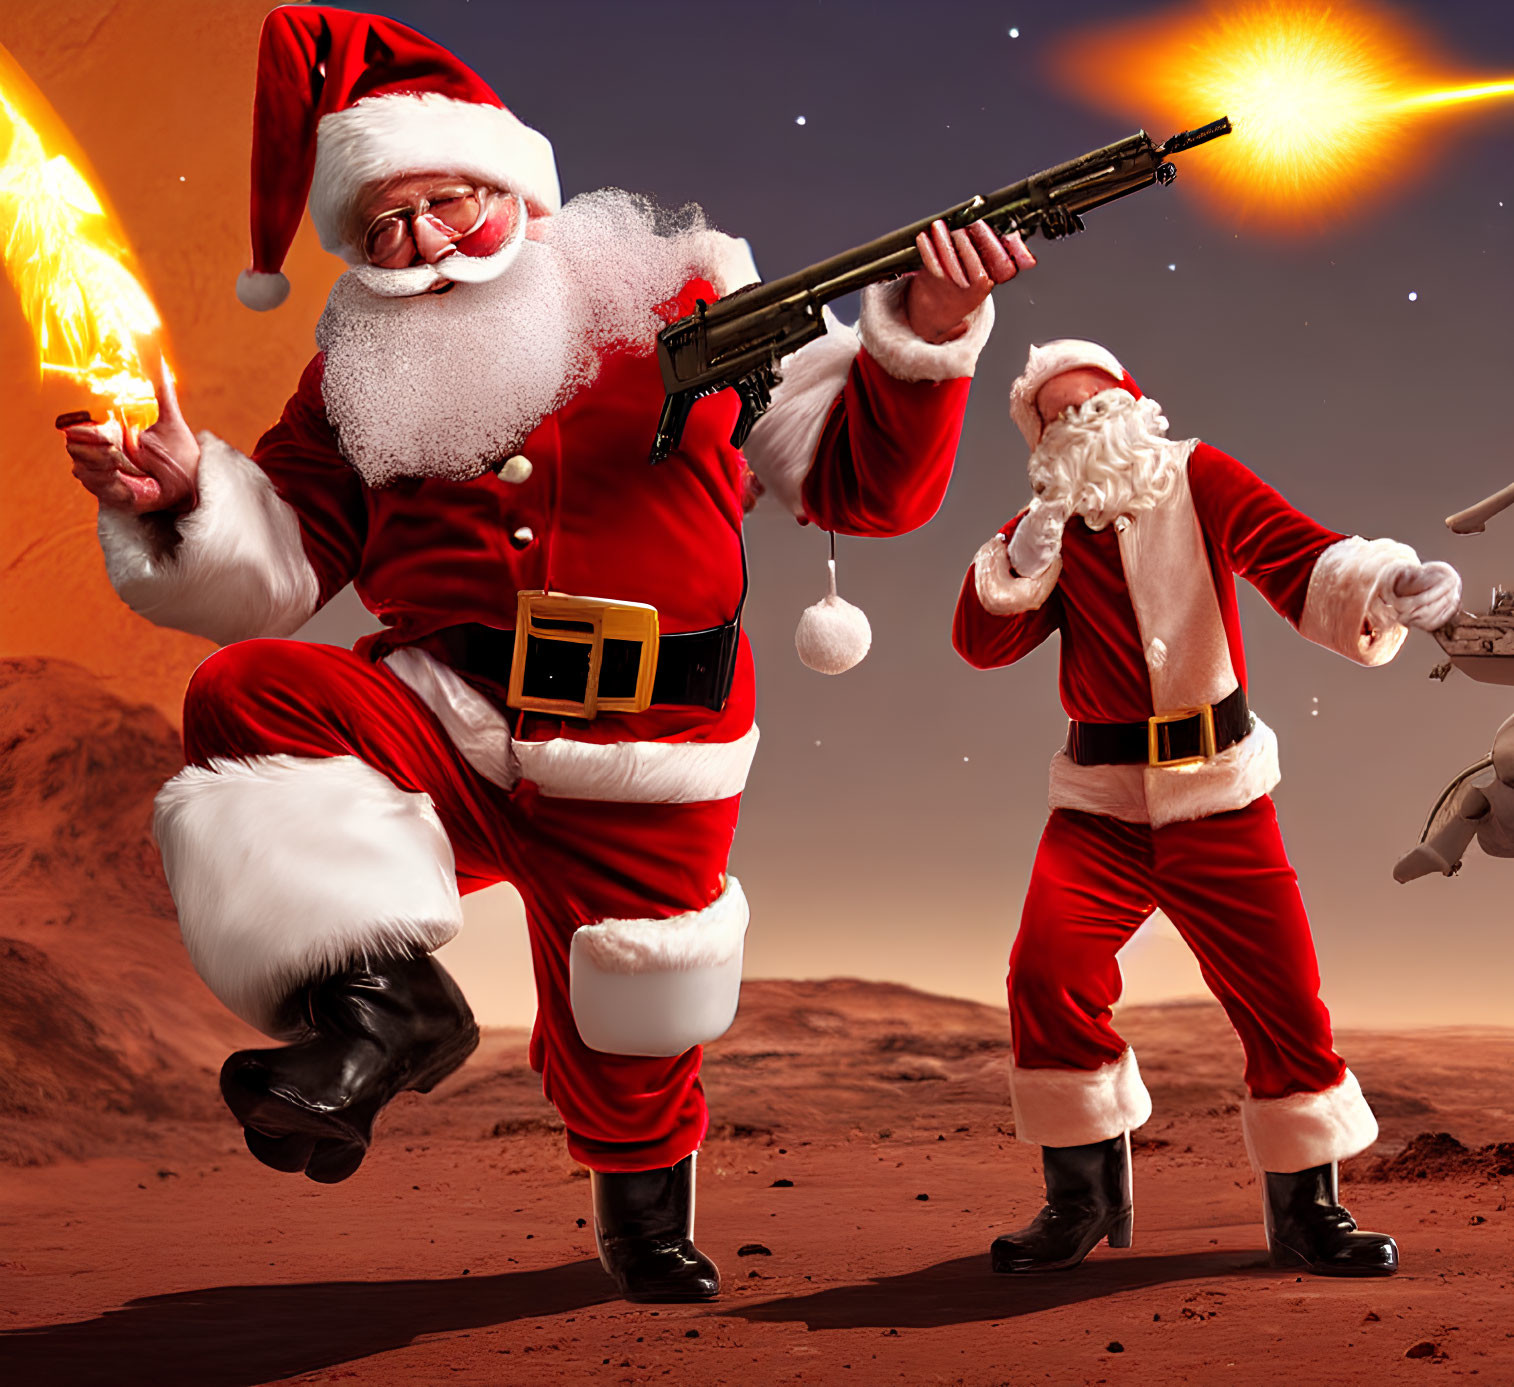 Santa Claus characters in action pose with bazooka and rifle against red sky